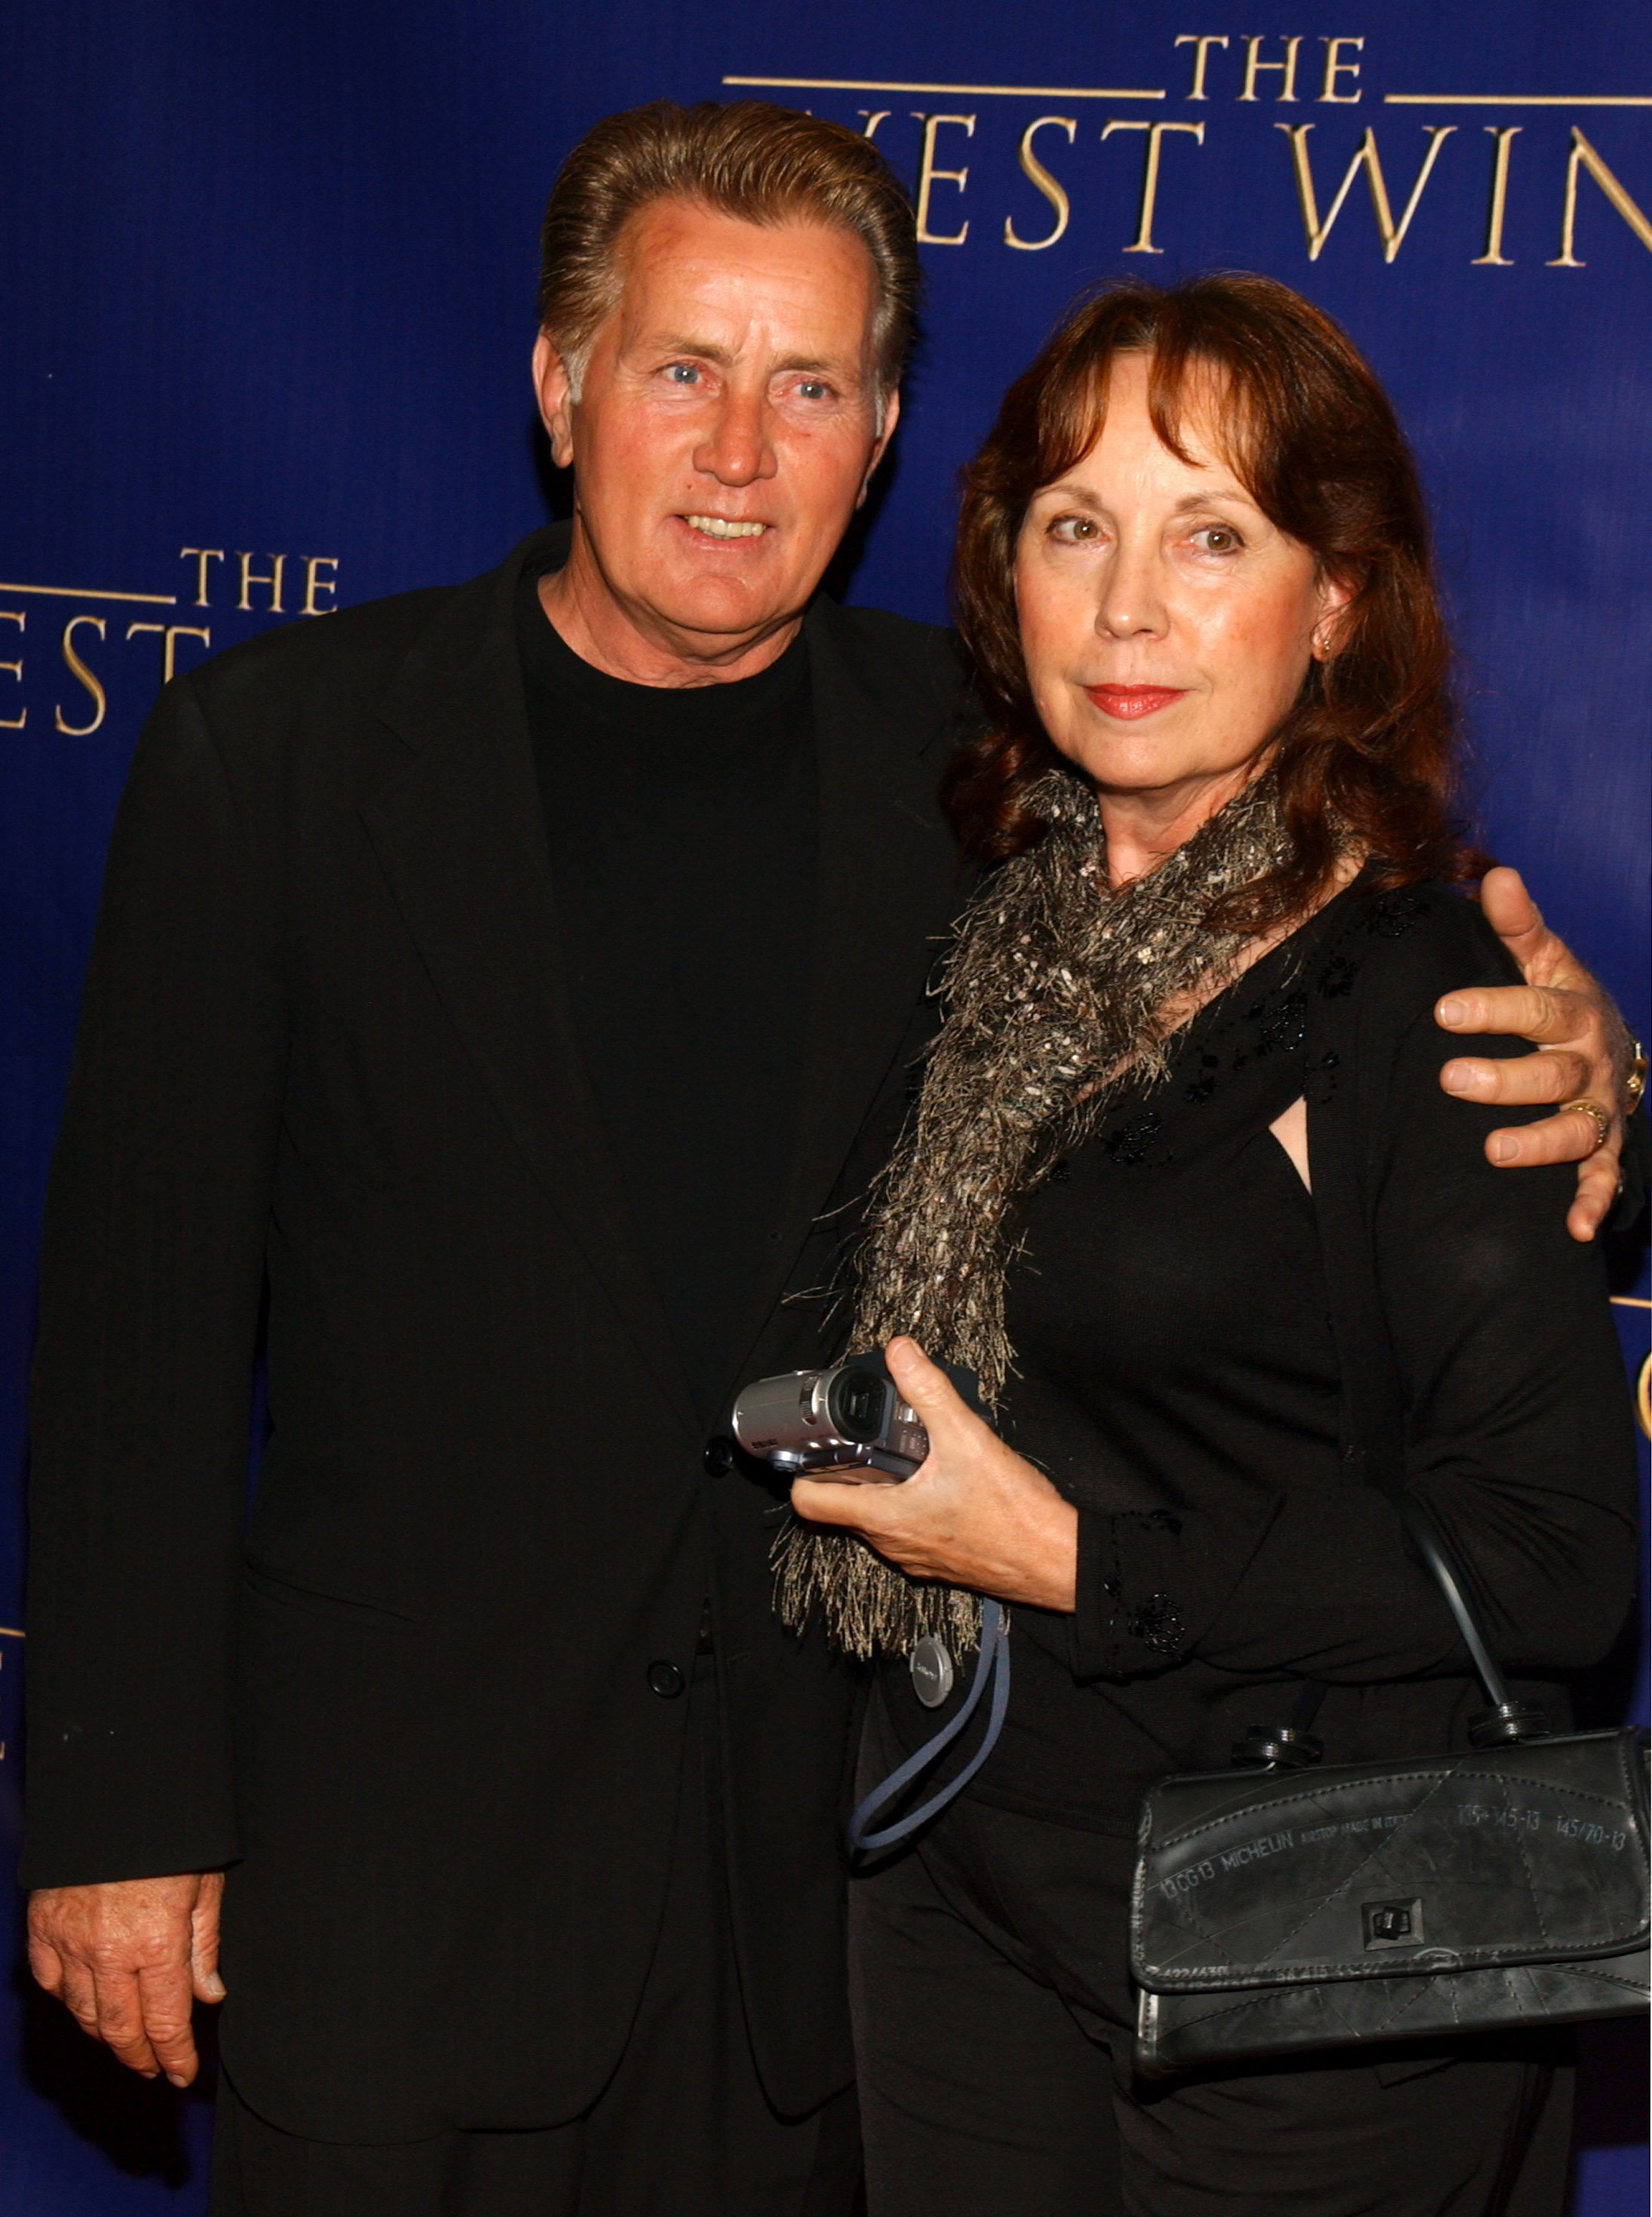 Martin Sheen and his wife Janet Sheen attend the 100th episode celebration of "The West Wing" at Four Seasons Hotel on November 2, 2003, in Los Angeles, California. | Source: Getty Images